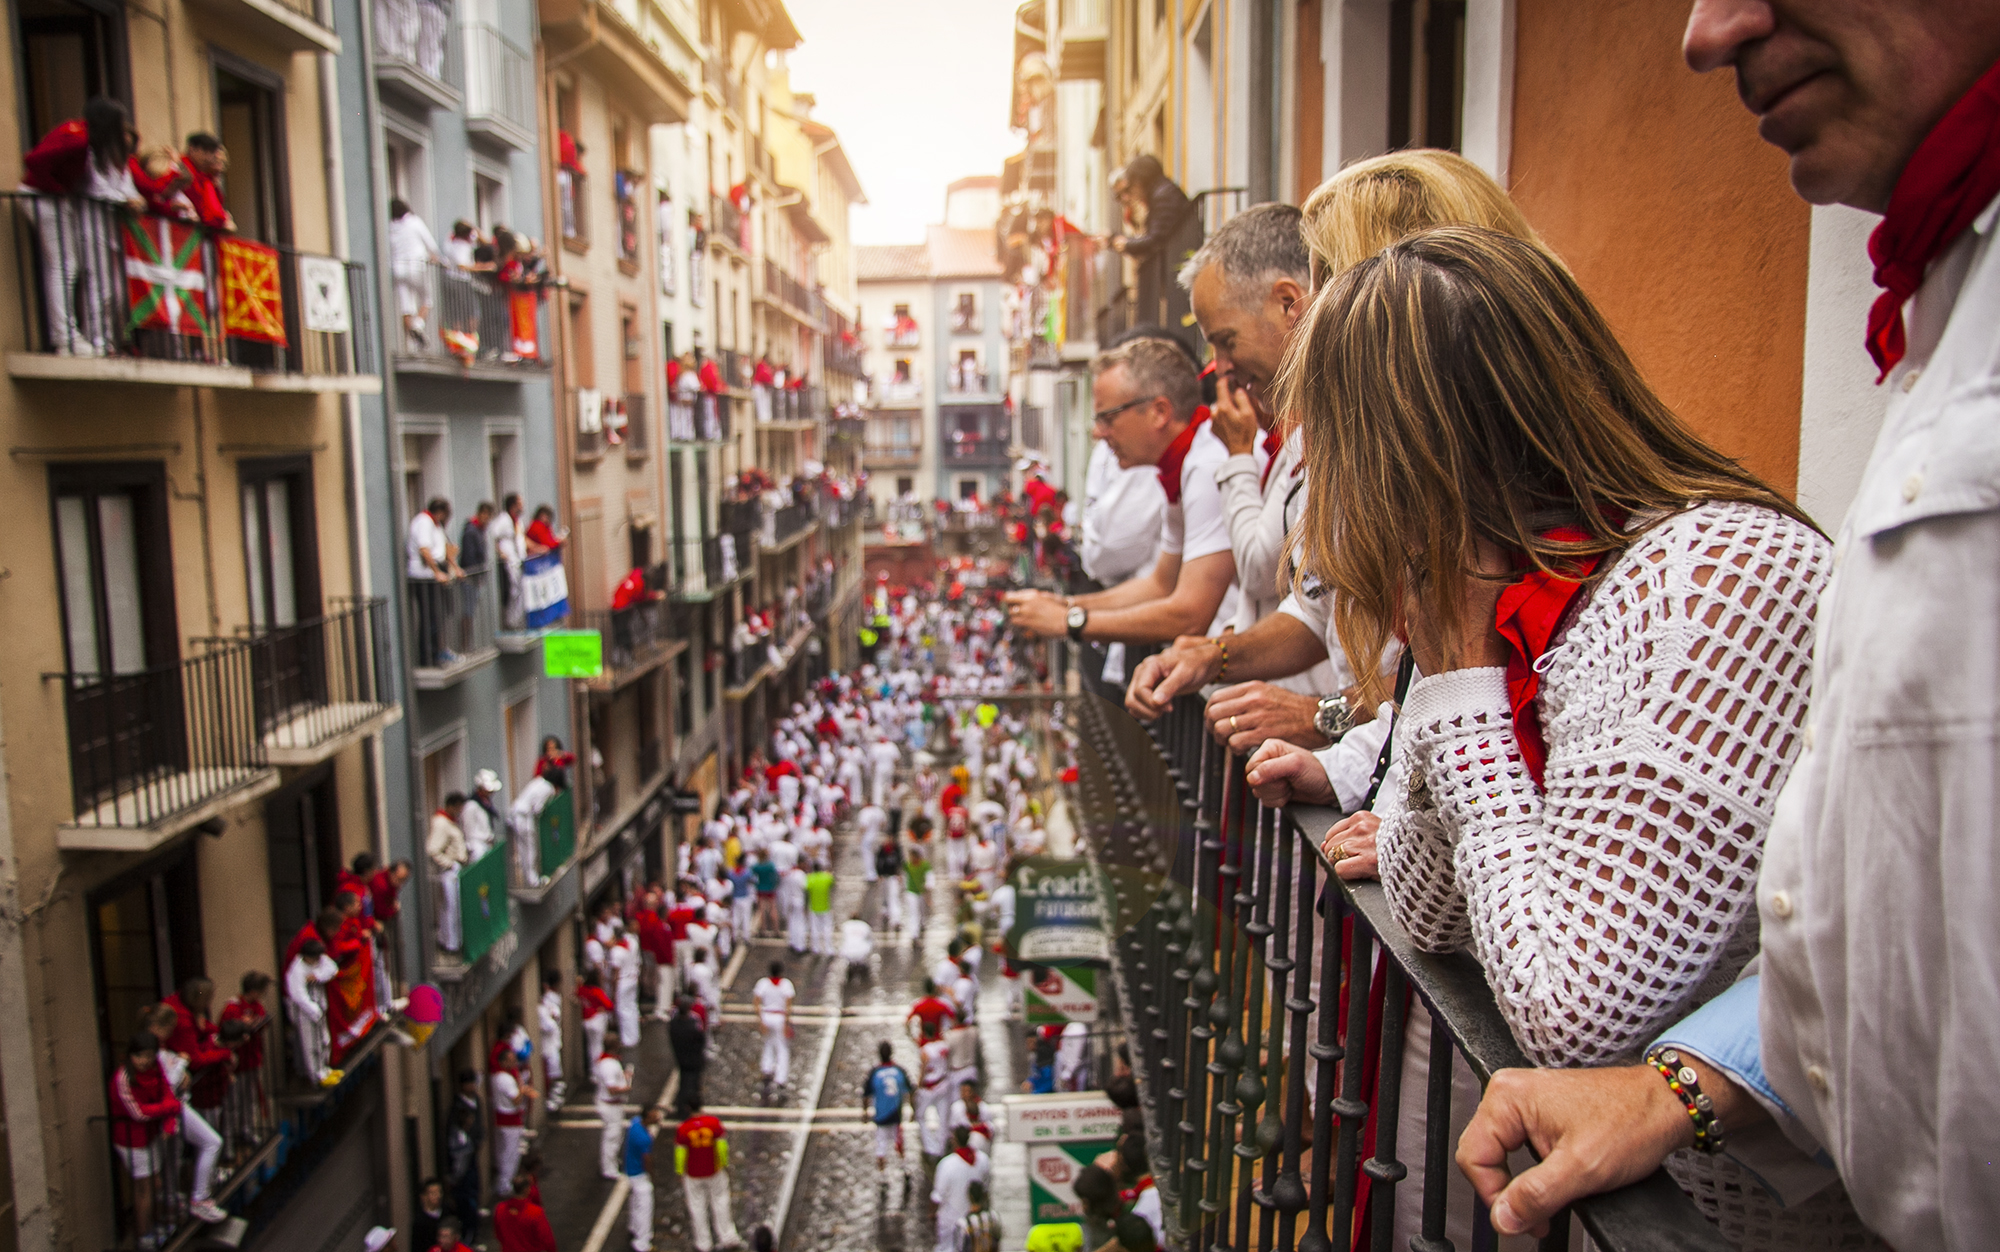 Guests viewing the Running of the Bulls from a balcony